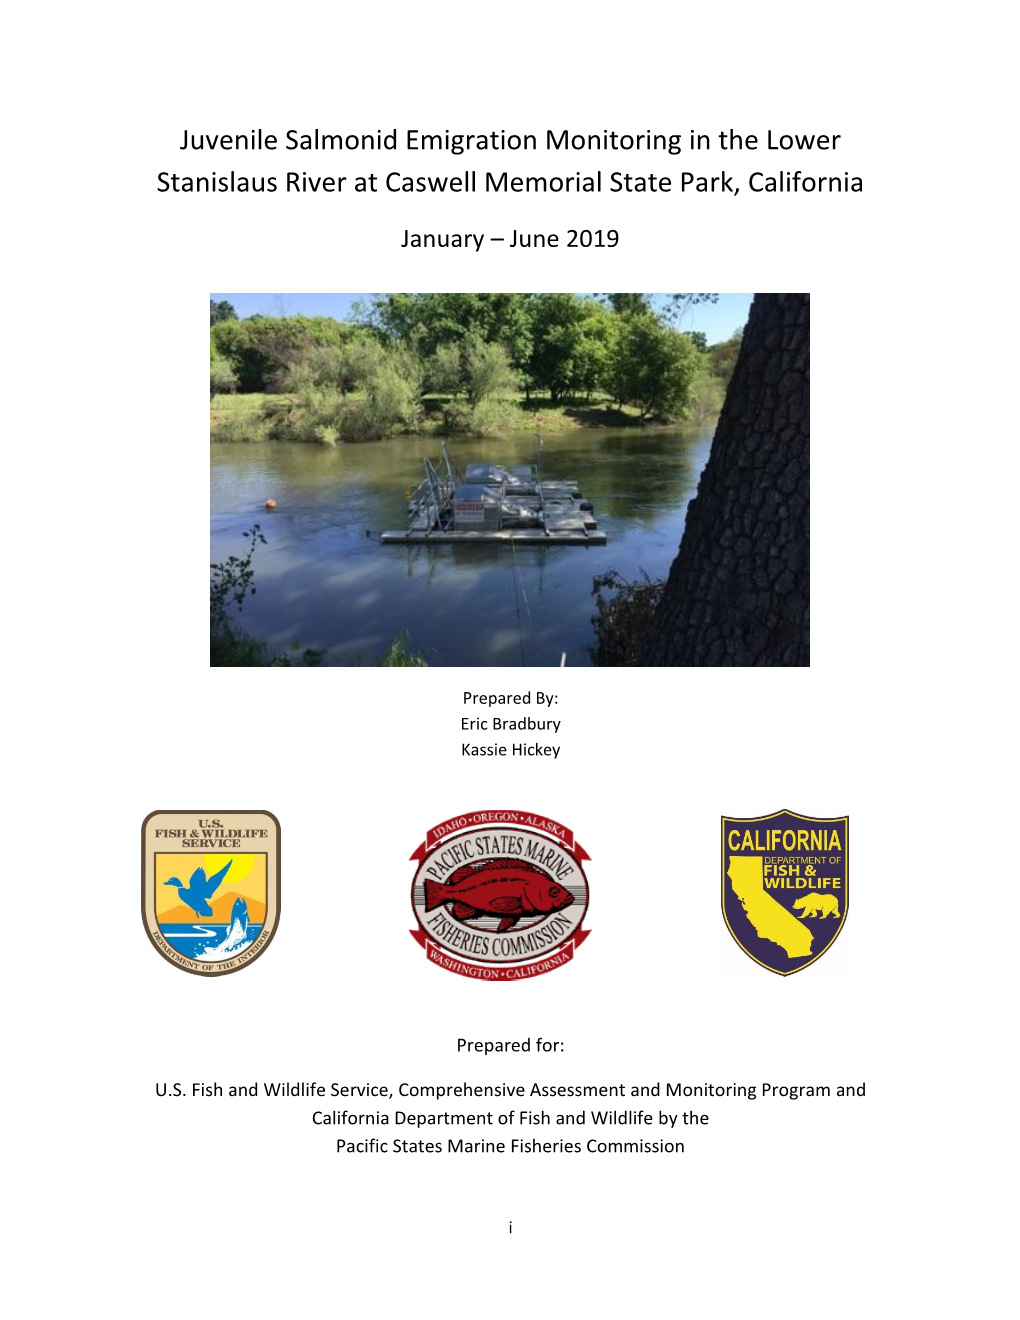 Juvenile Salmonid Emigration Monitoring in the Lower Stanislaus River at Caswell Memorial State Park, California